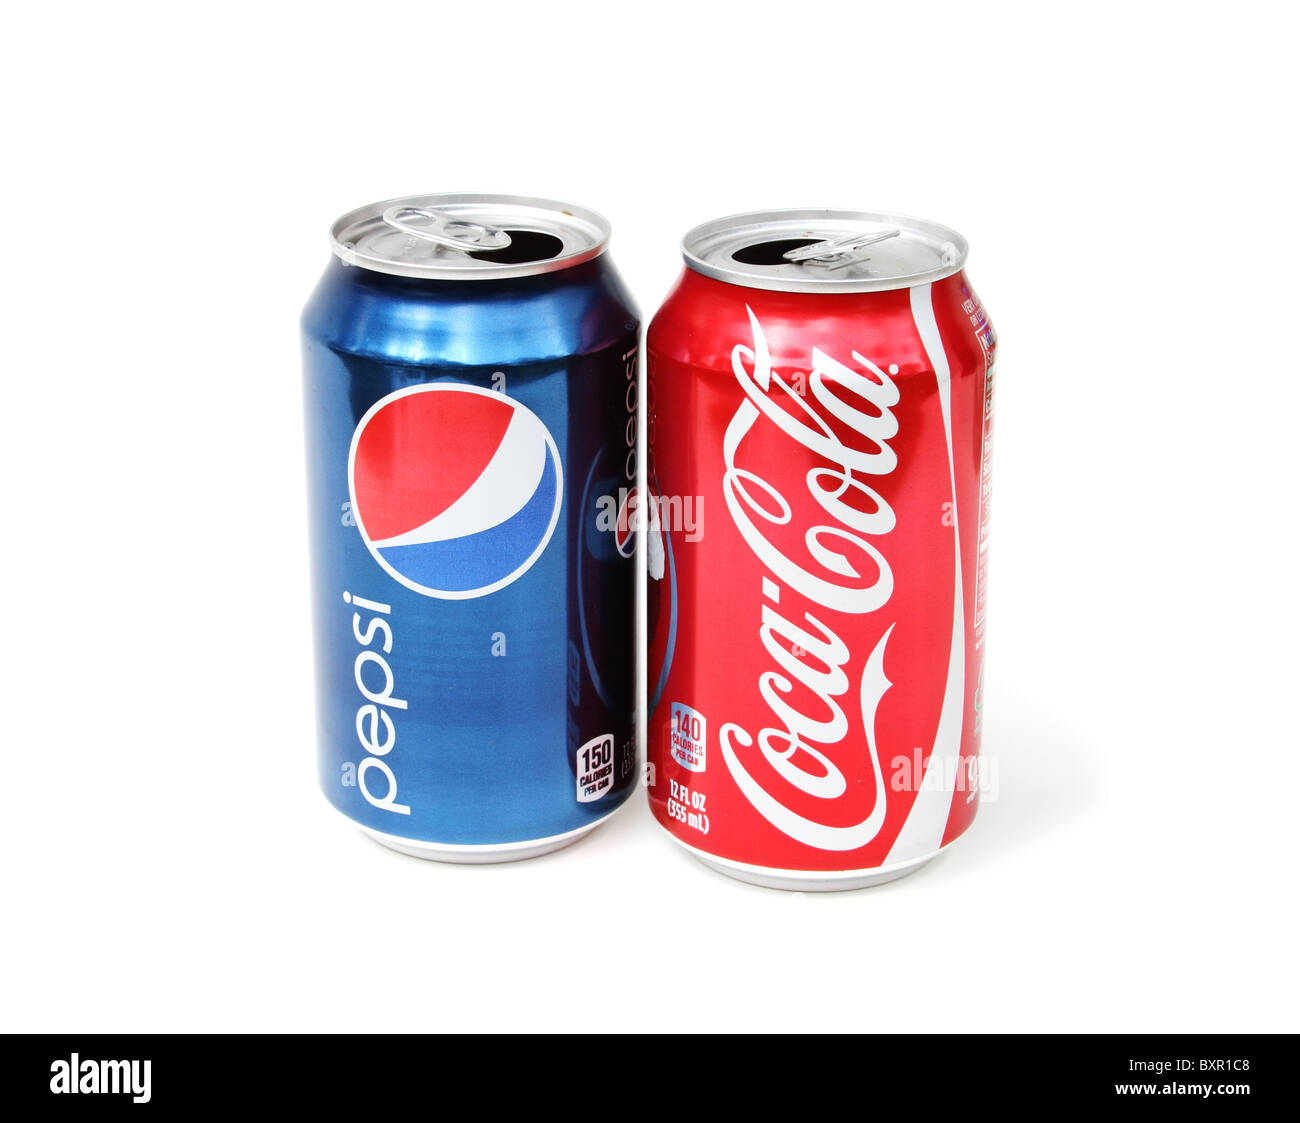 Competing cola brands: Coca Cola and Pepsi. Soda pop cans. Stock Photo